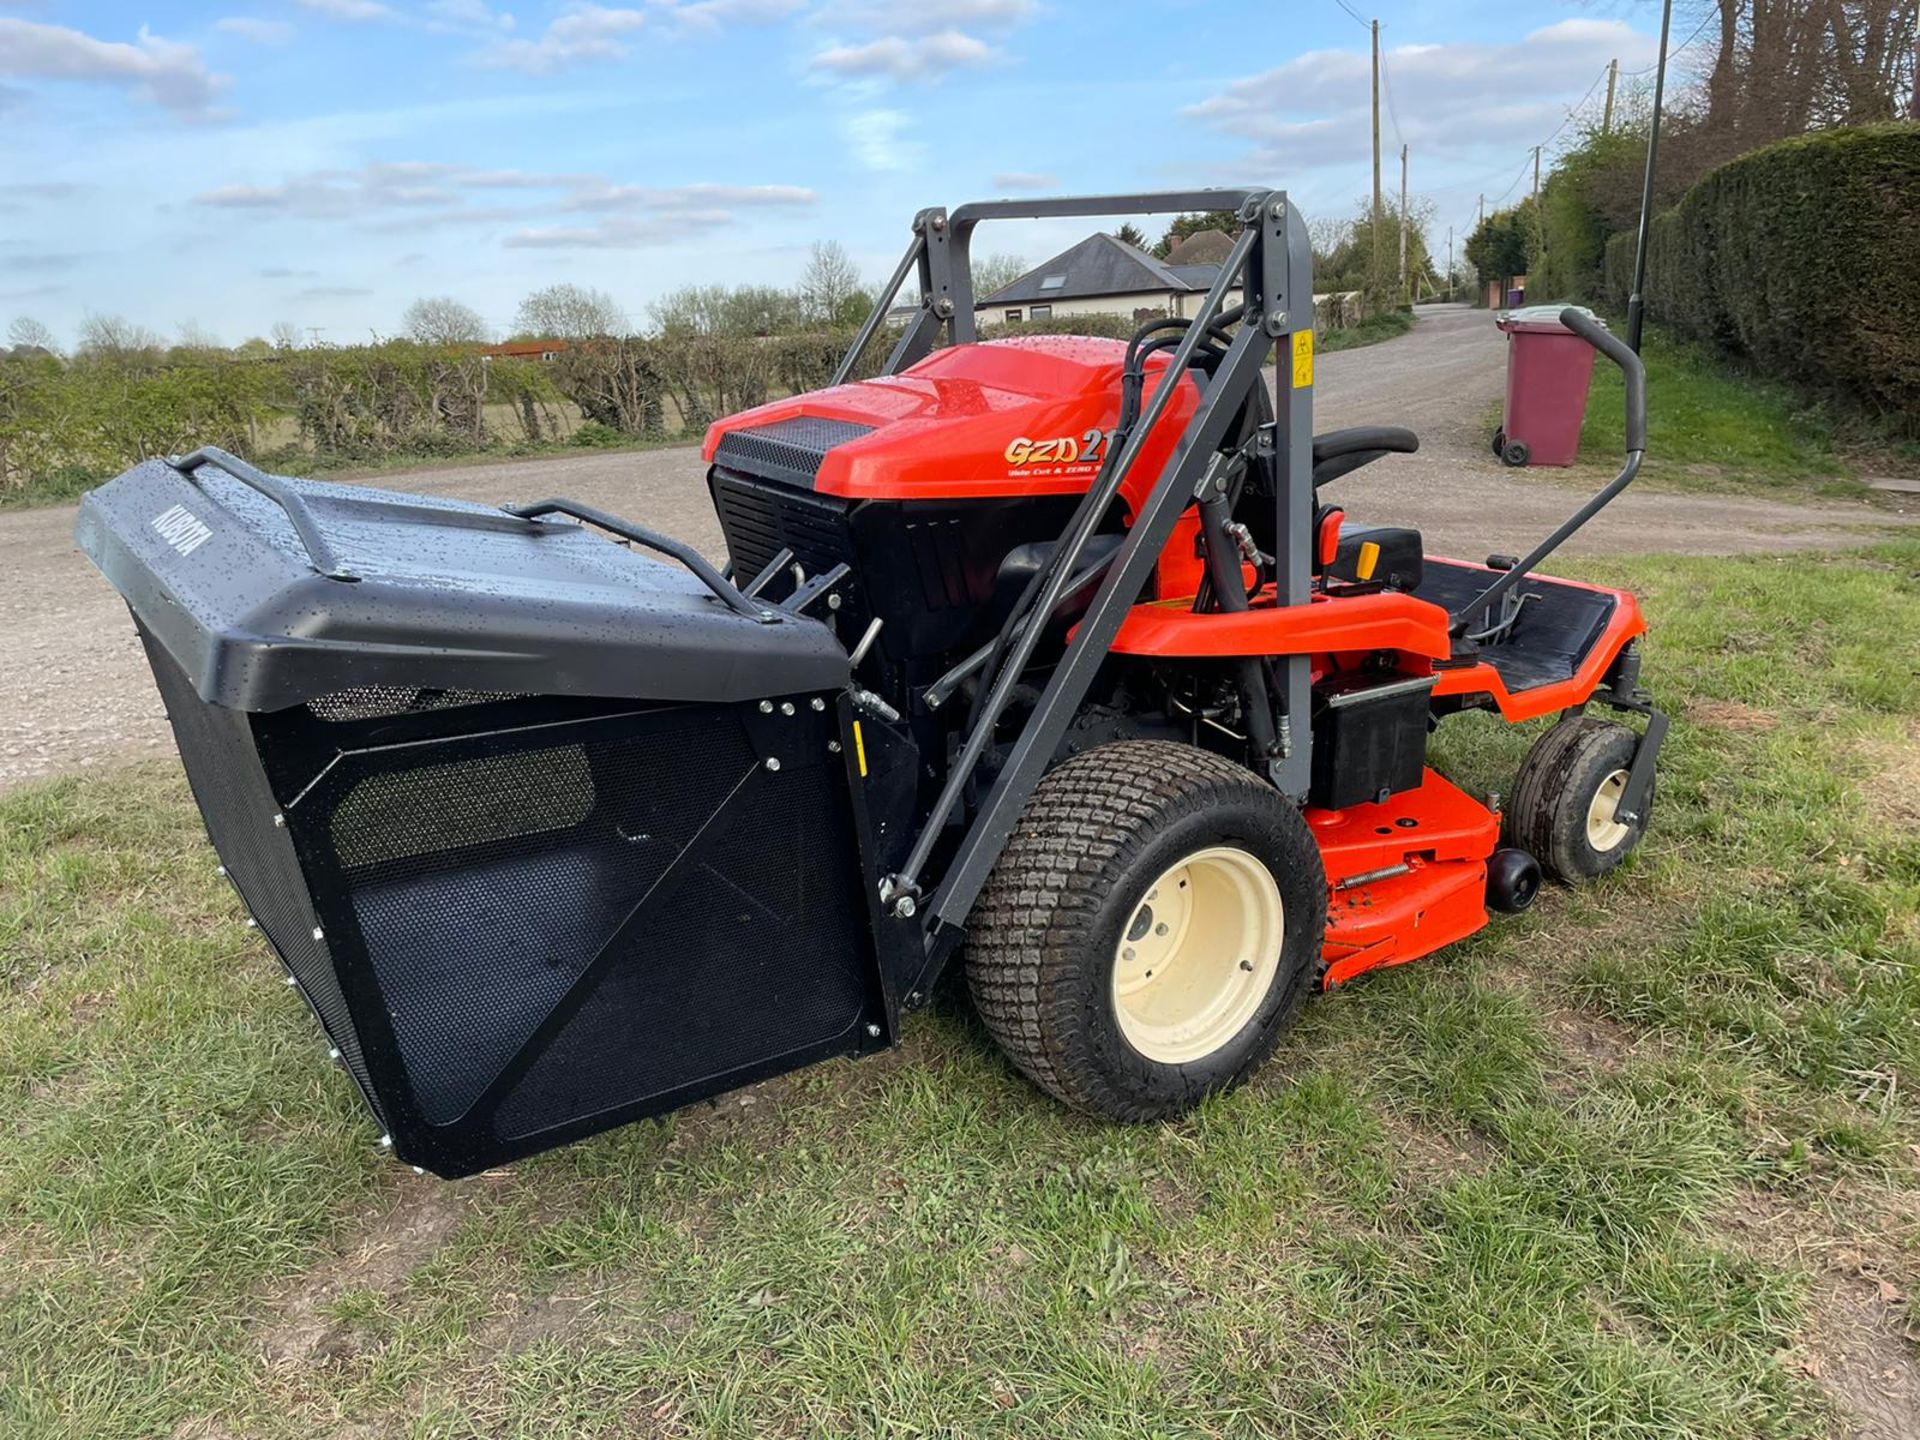 2018 KUBOTA GZD21 ZERO TURN MOWER, RUNS DRIVES AND CUTS, 335 HRS HIGH TIP COLLECTOR *PLUS VAT* - Image 7 of 16